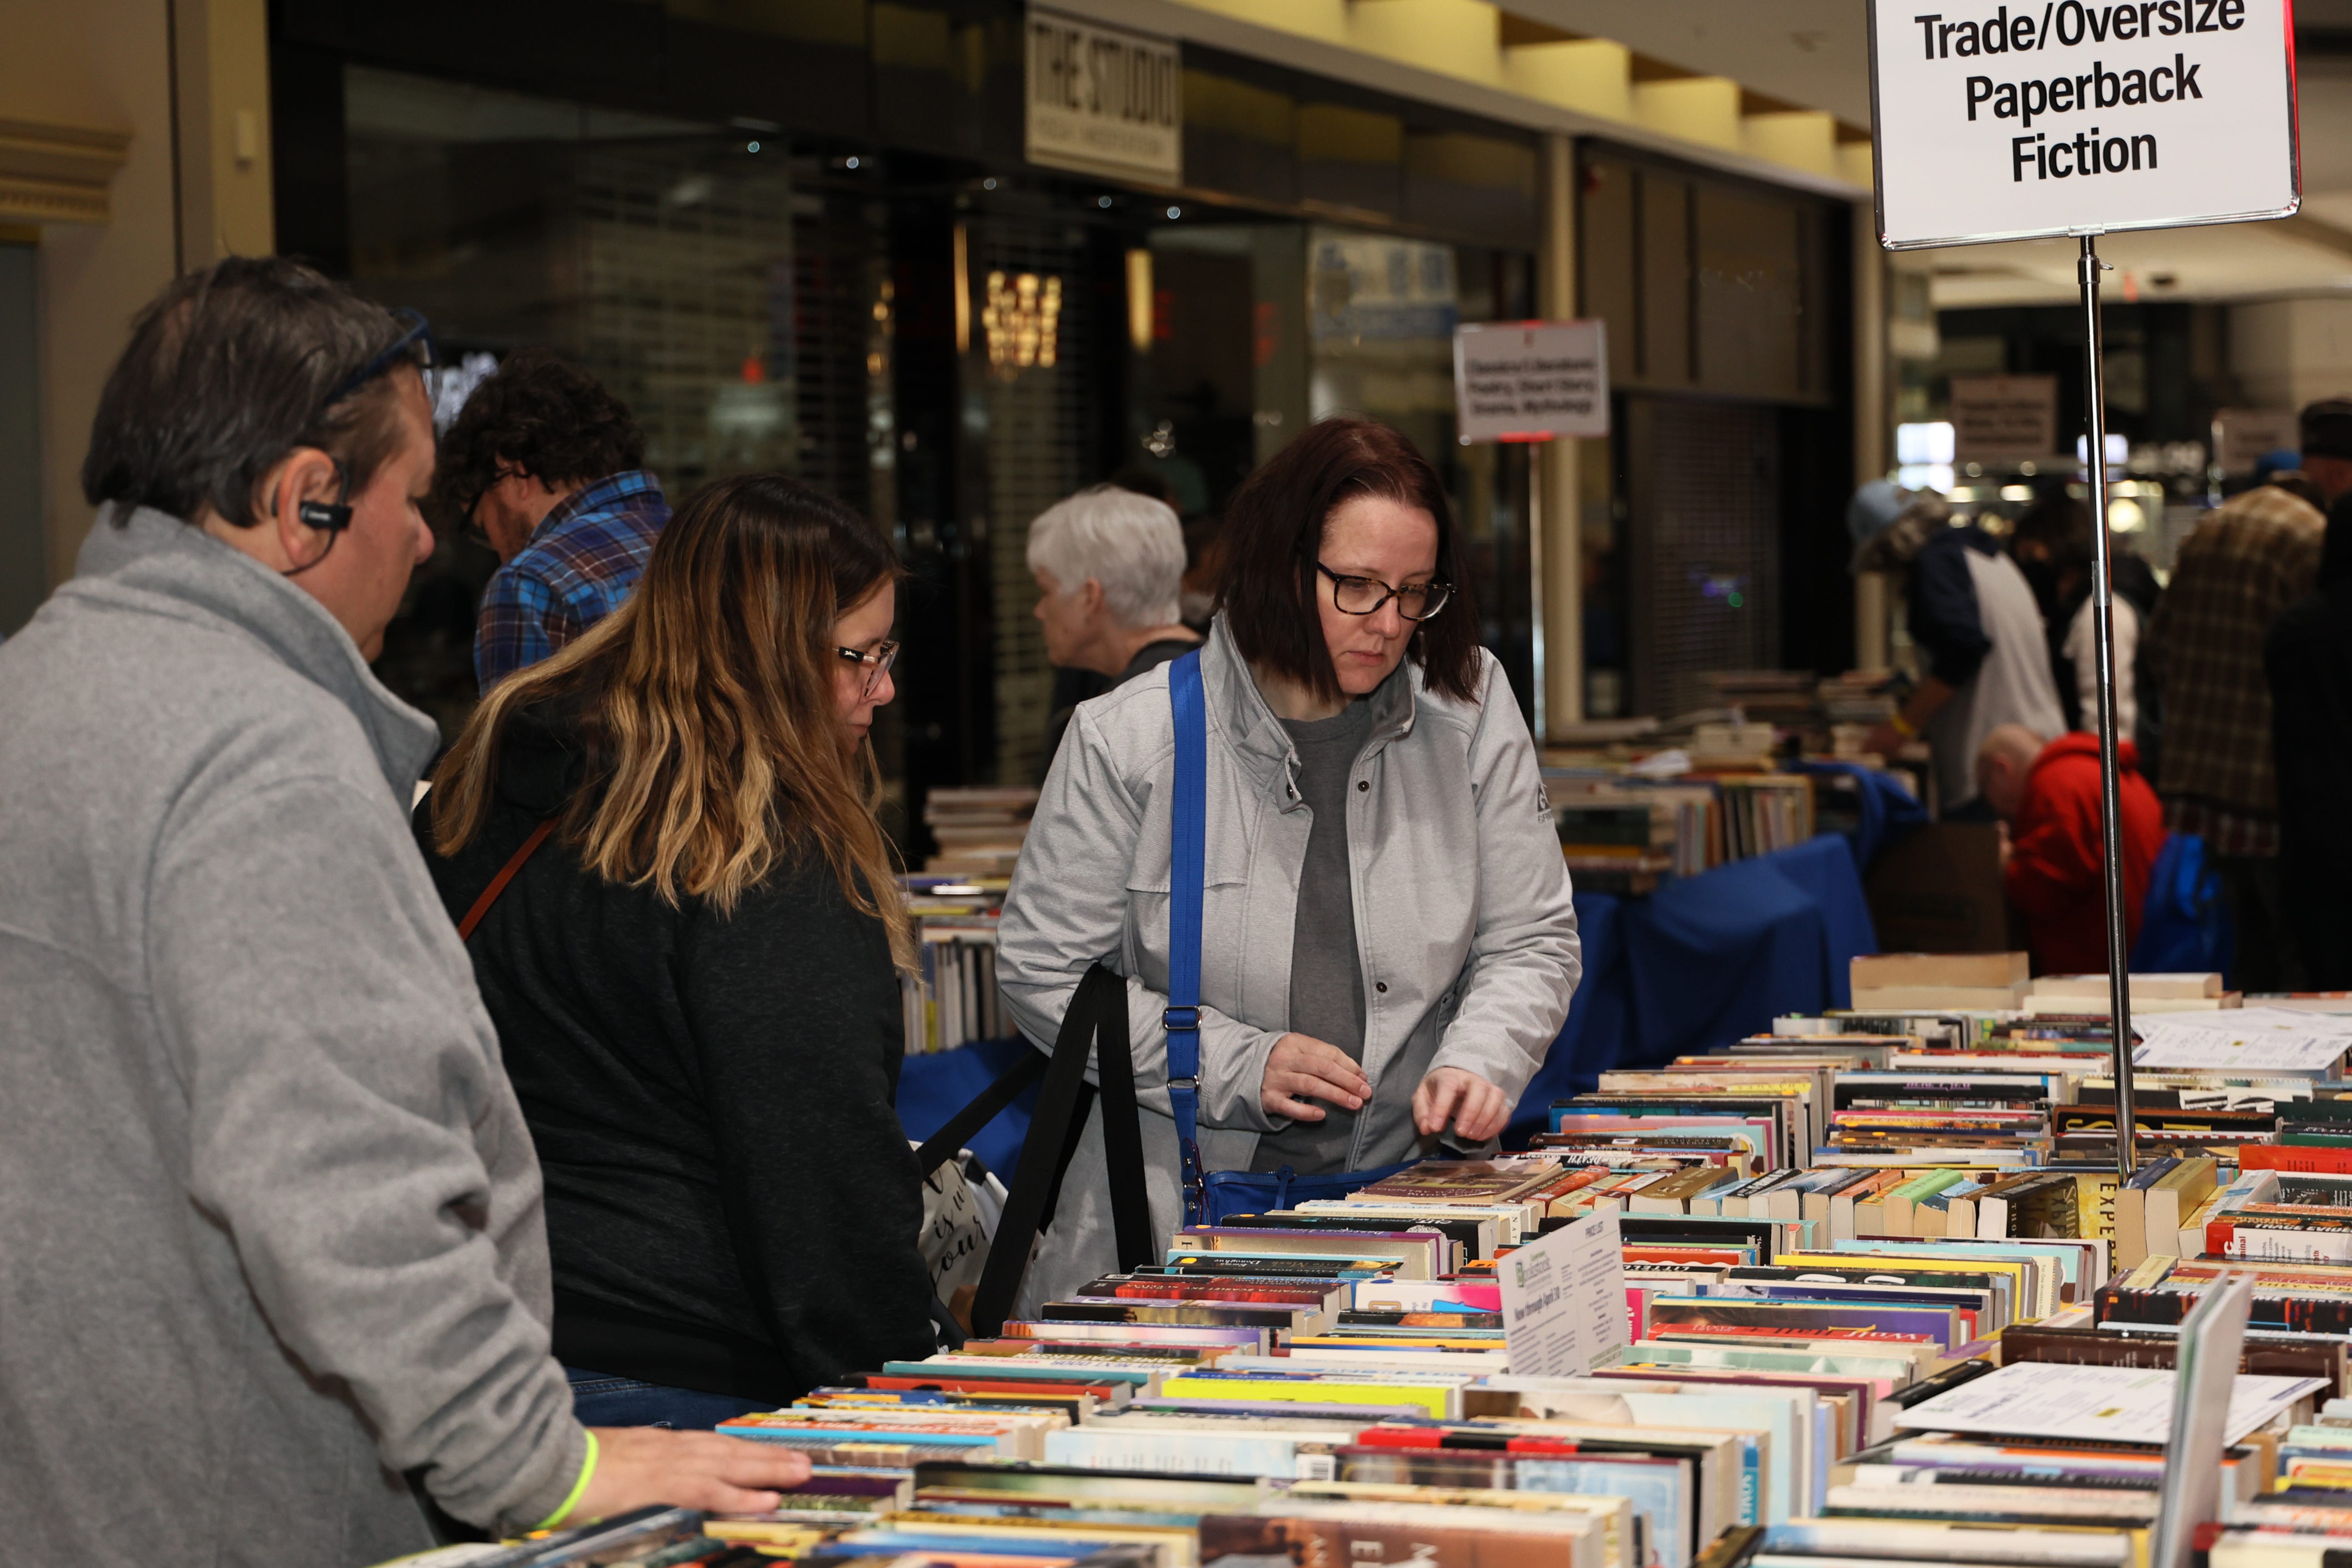 Bookstock will be at Livonia’s Laurel Park Place from April 7-14.